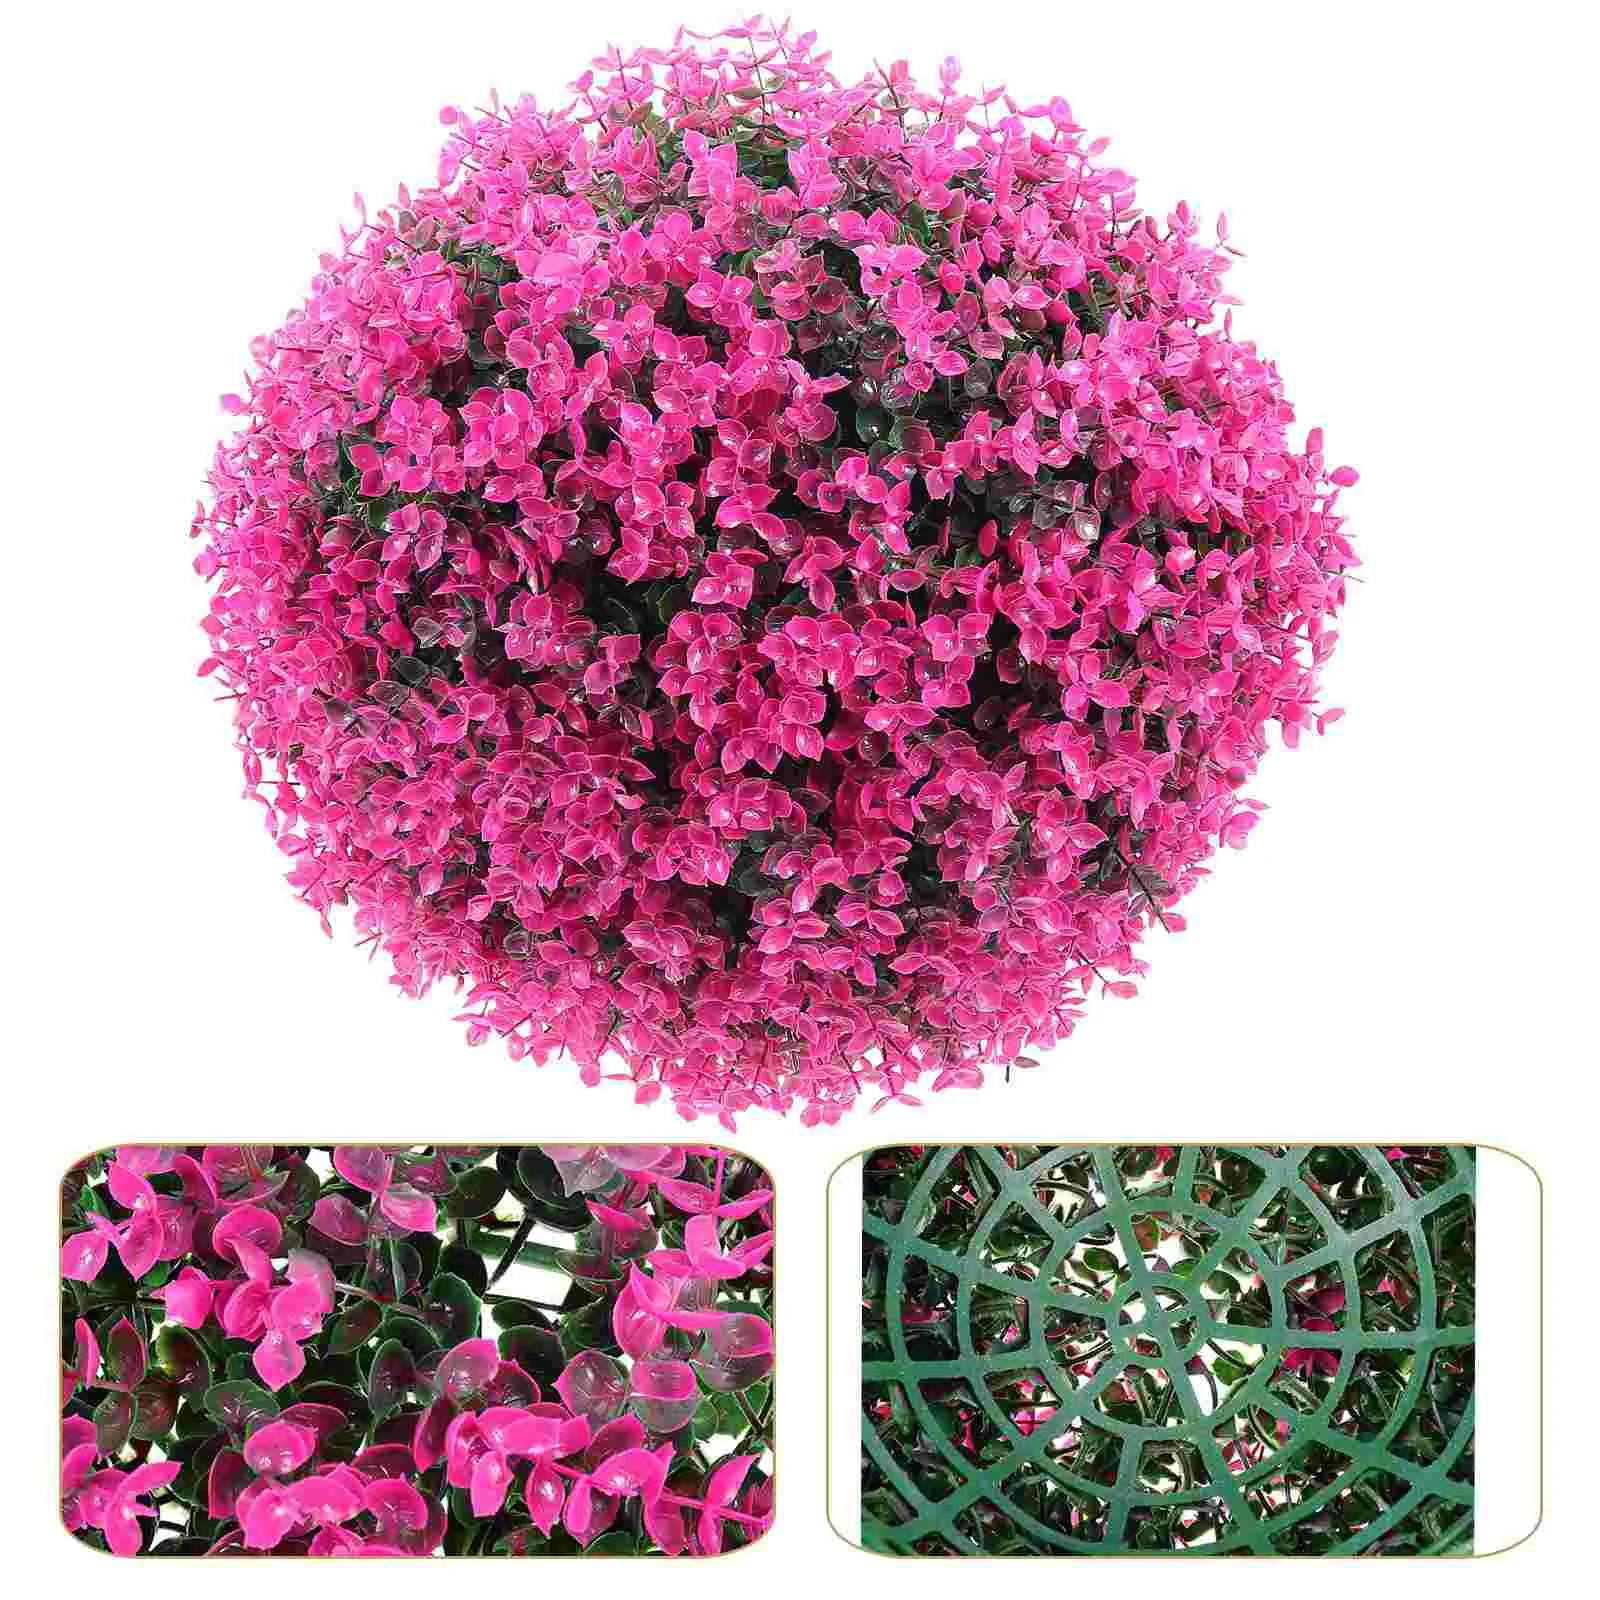 

Balls Topiary Ball Artificial Grass Boxwood Faux Decorative Hanging Fake Greenery Outdoor Simulation Trees Plastic Garden